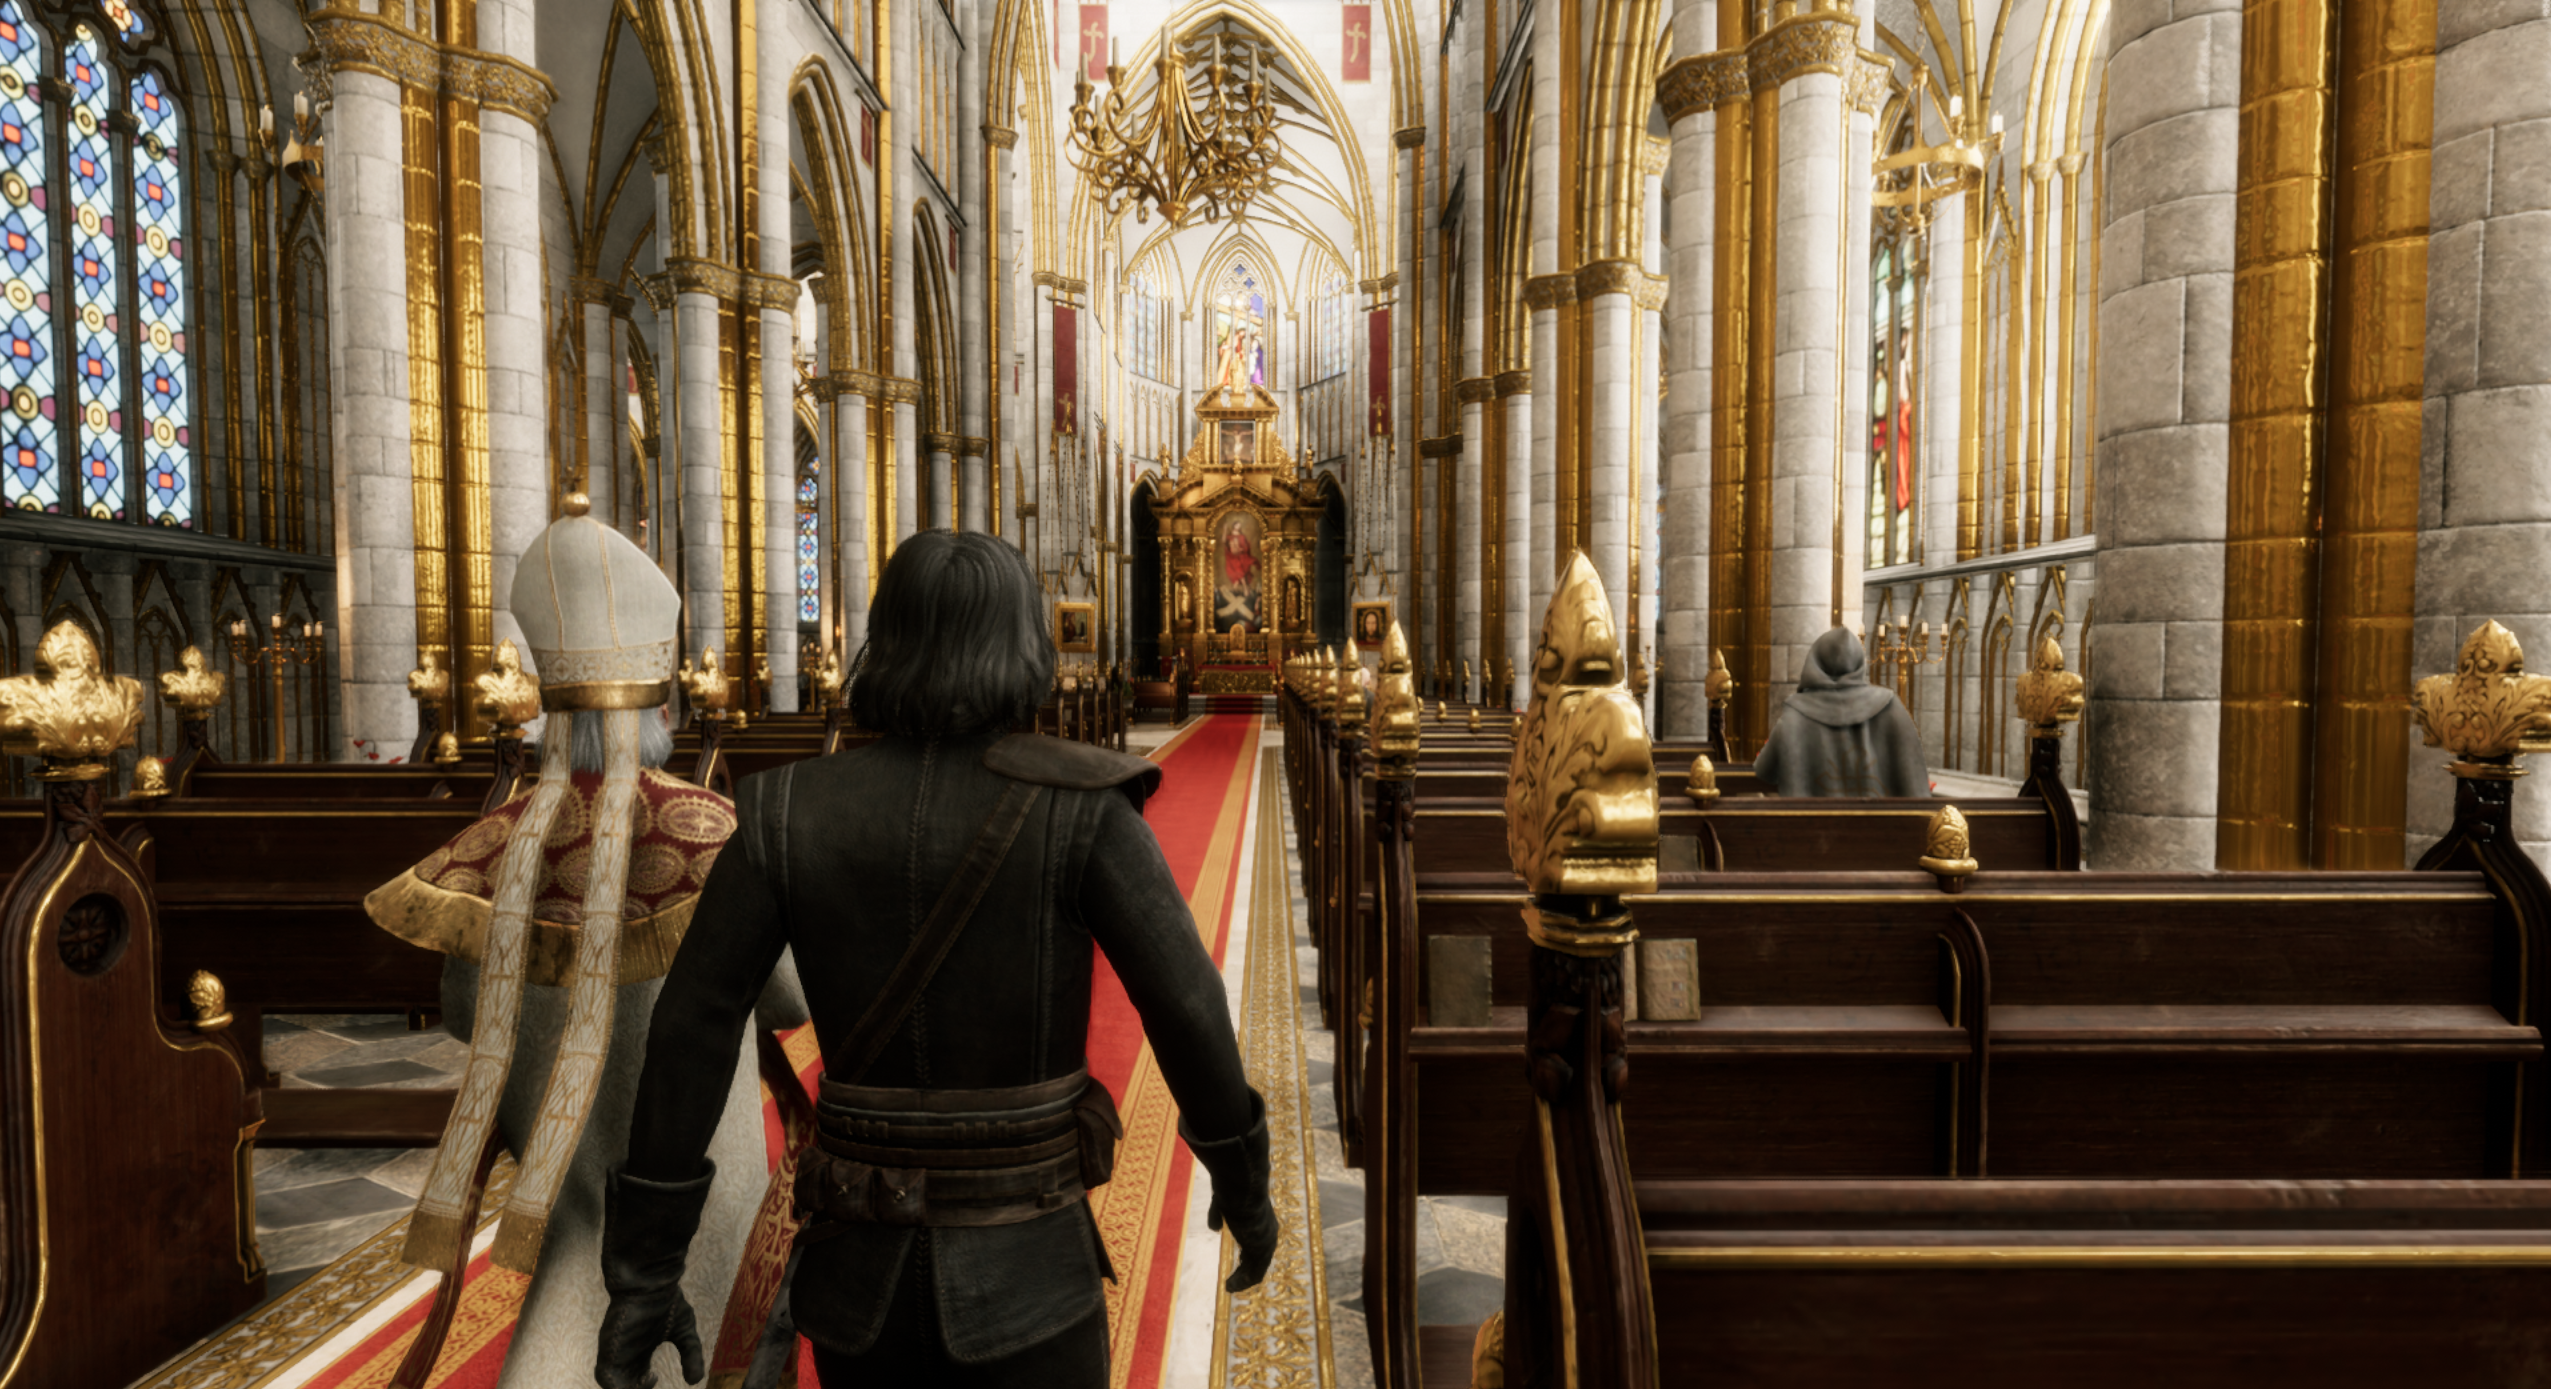 The Inquisitor review image showing Mordimer Madderdin walking through a cathedral's interior.